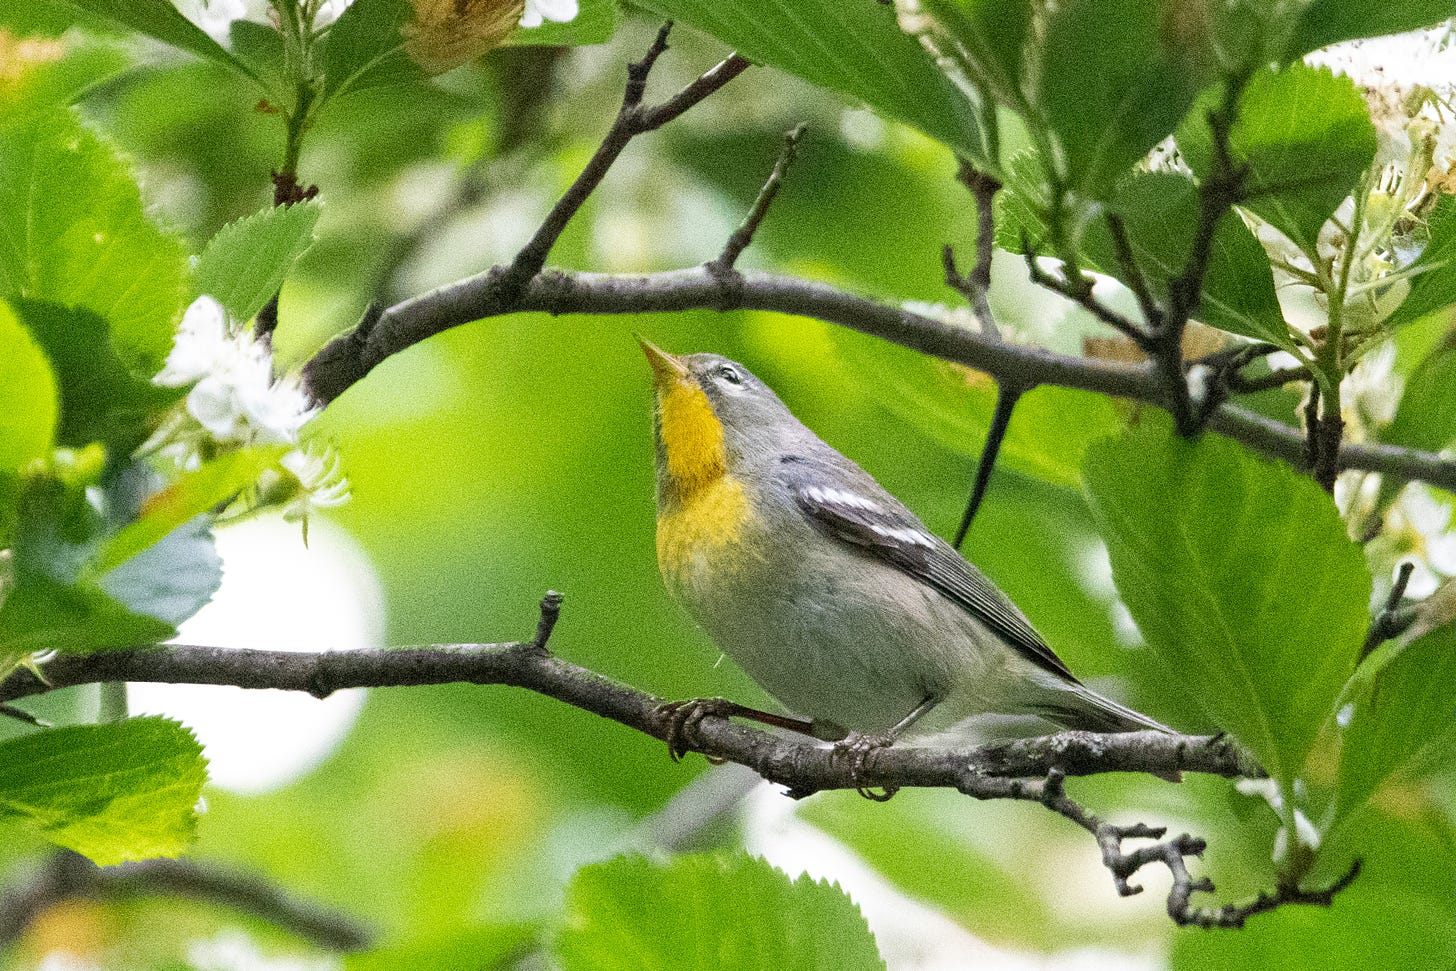 The yellow throat and breast and slate-blue face of a Northern parula